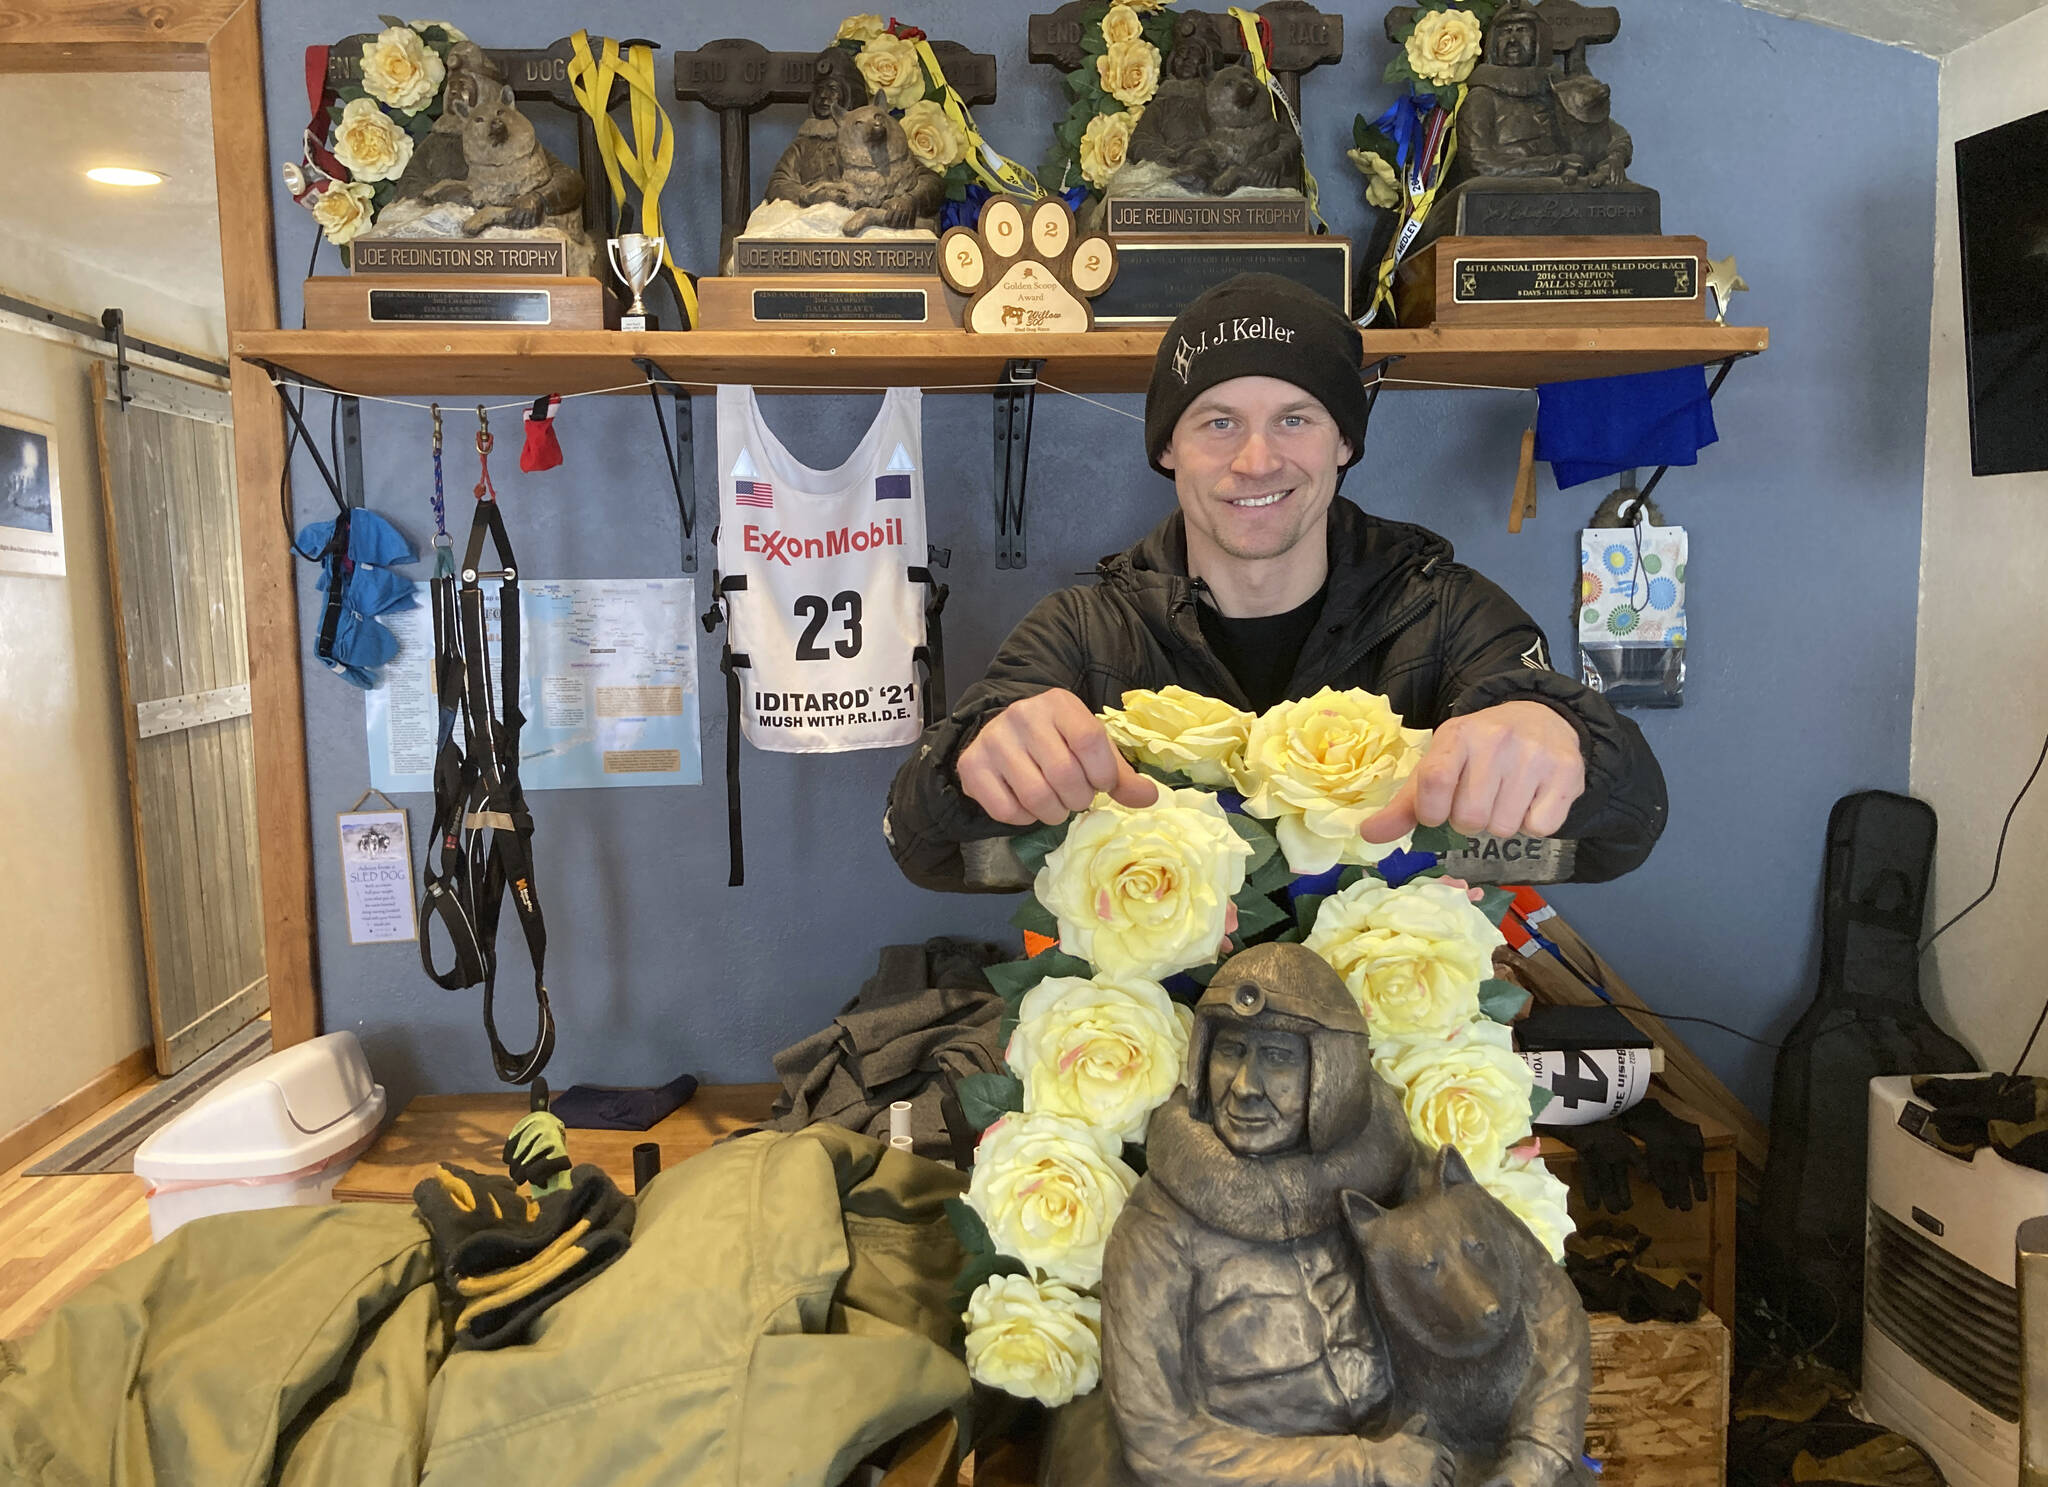 Dallas Seavey is shown Feb. 22, 2022, posing with his five Iditarod Trail Sled Dog championship trophies in Talkeetna, Alaska. Seavey is tied with musher Rick Swenson for the most Iditarod victories ever at five, and Seavey is looking for his sixth title when the Iditarod Trail Sled Dog Race starts this weekend in Alaska. (AP Photo / Mark Thiessen)